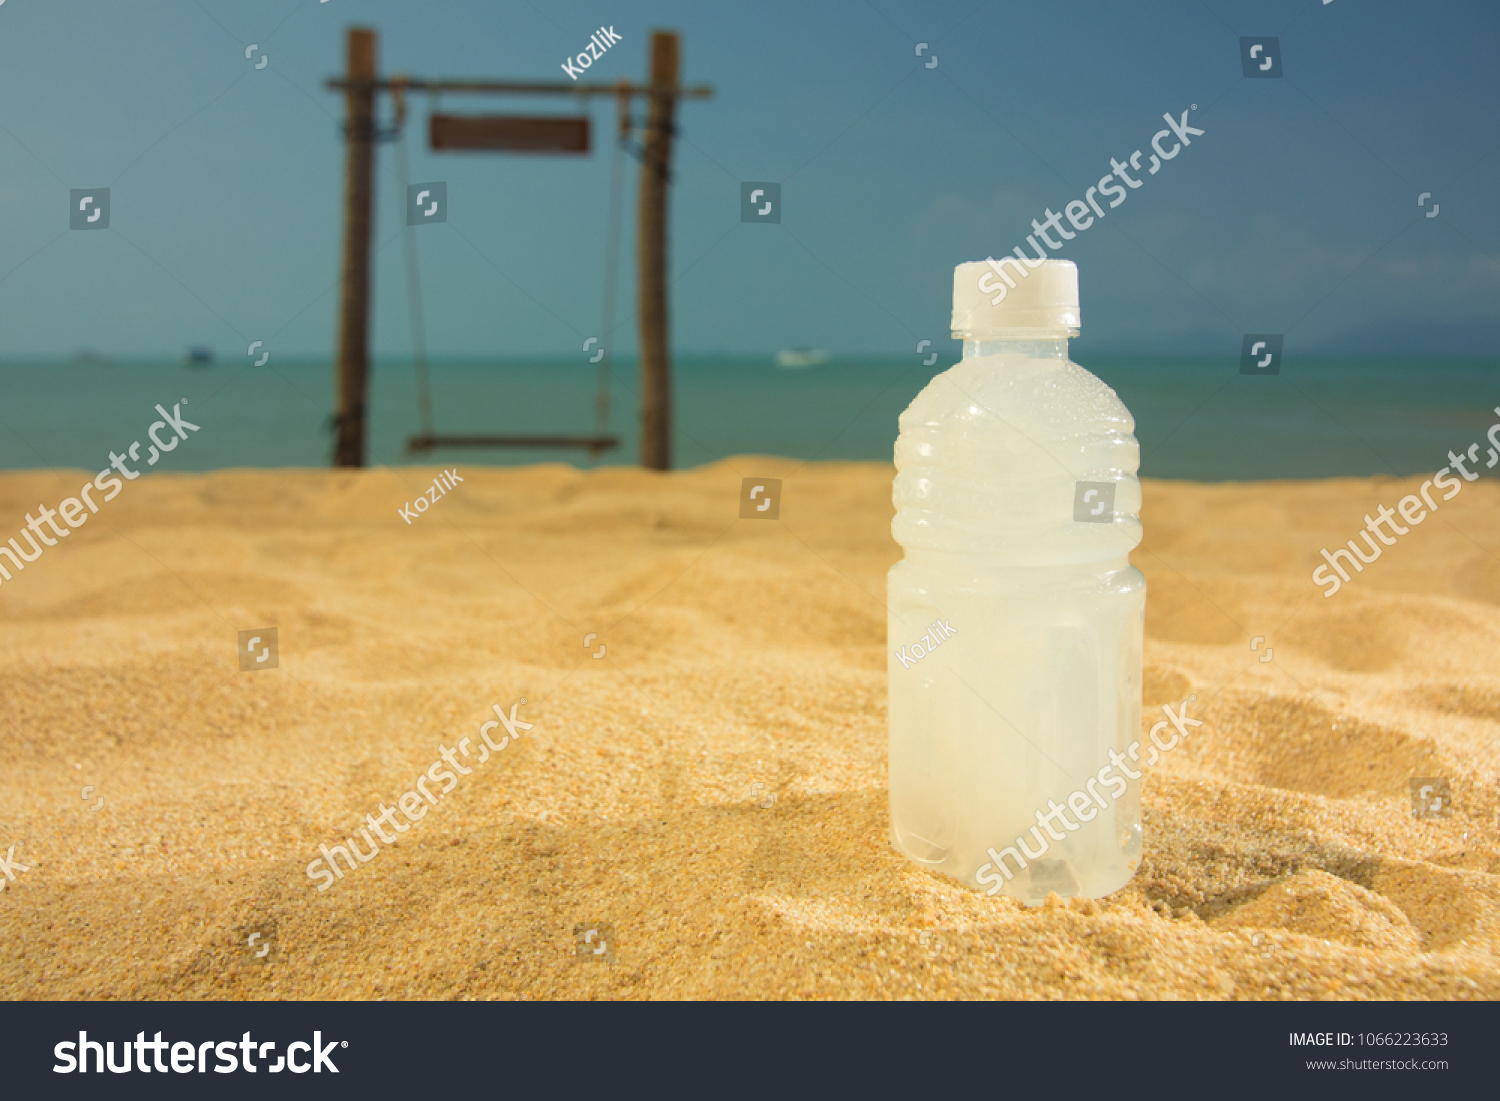 Download Bottles Multicolored Drinks Yellow Red Green Food And Drink Stock Image 1066223633 Yellowimages Mockups